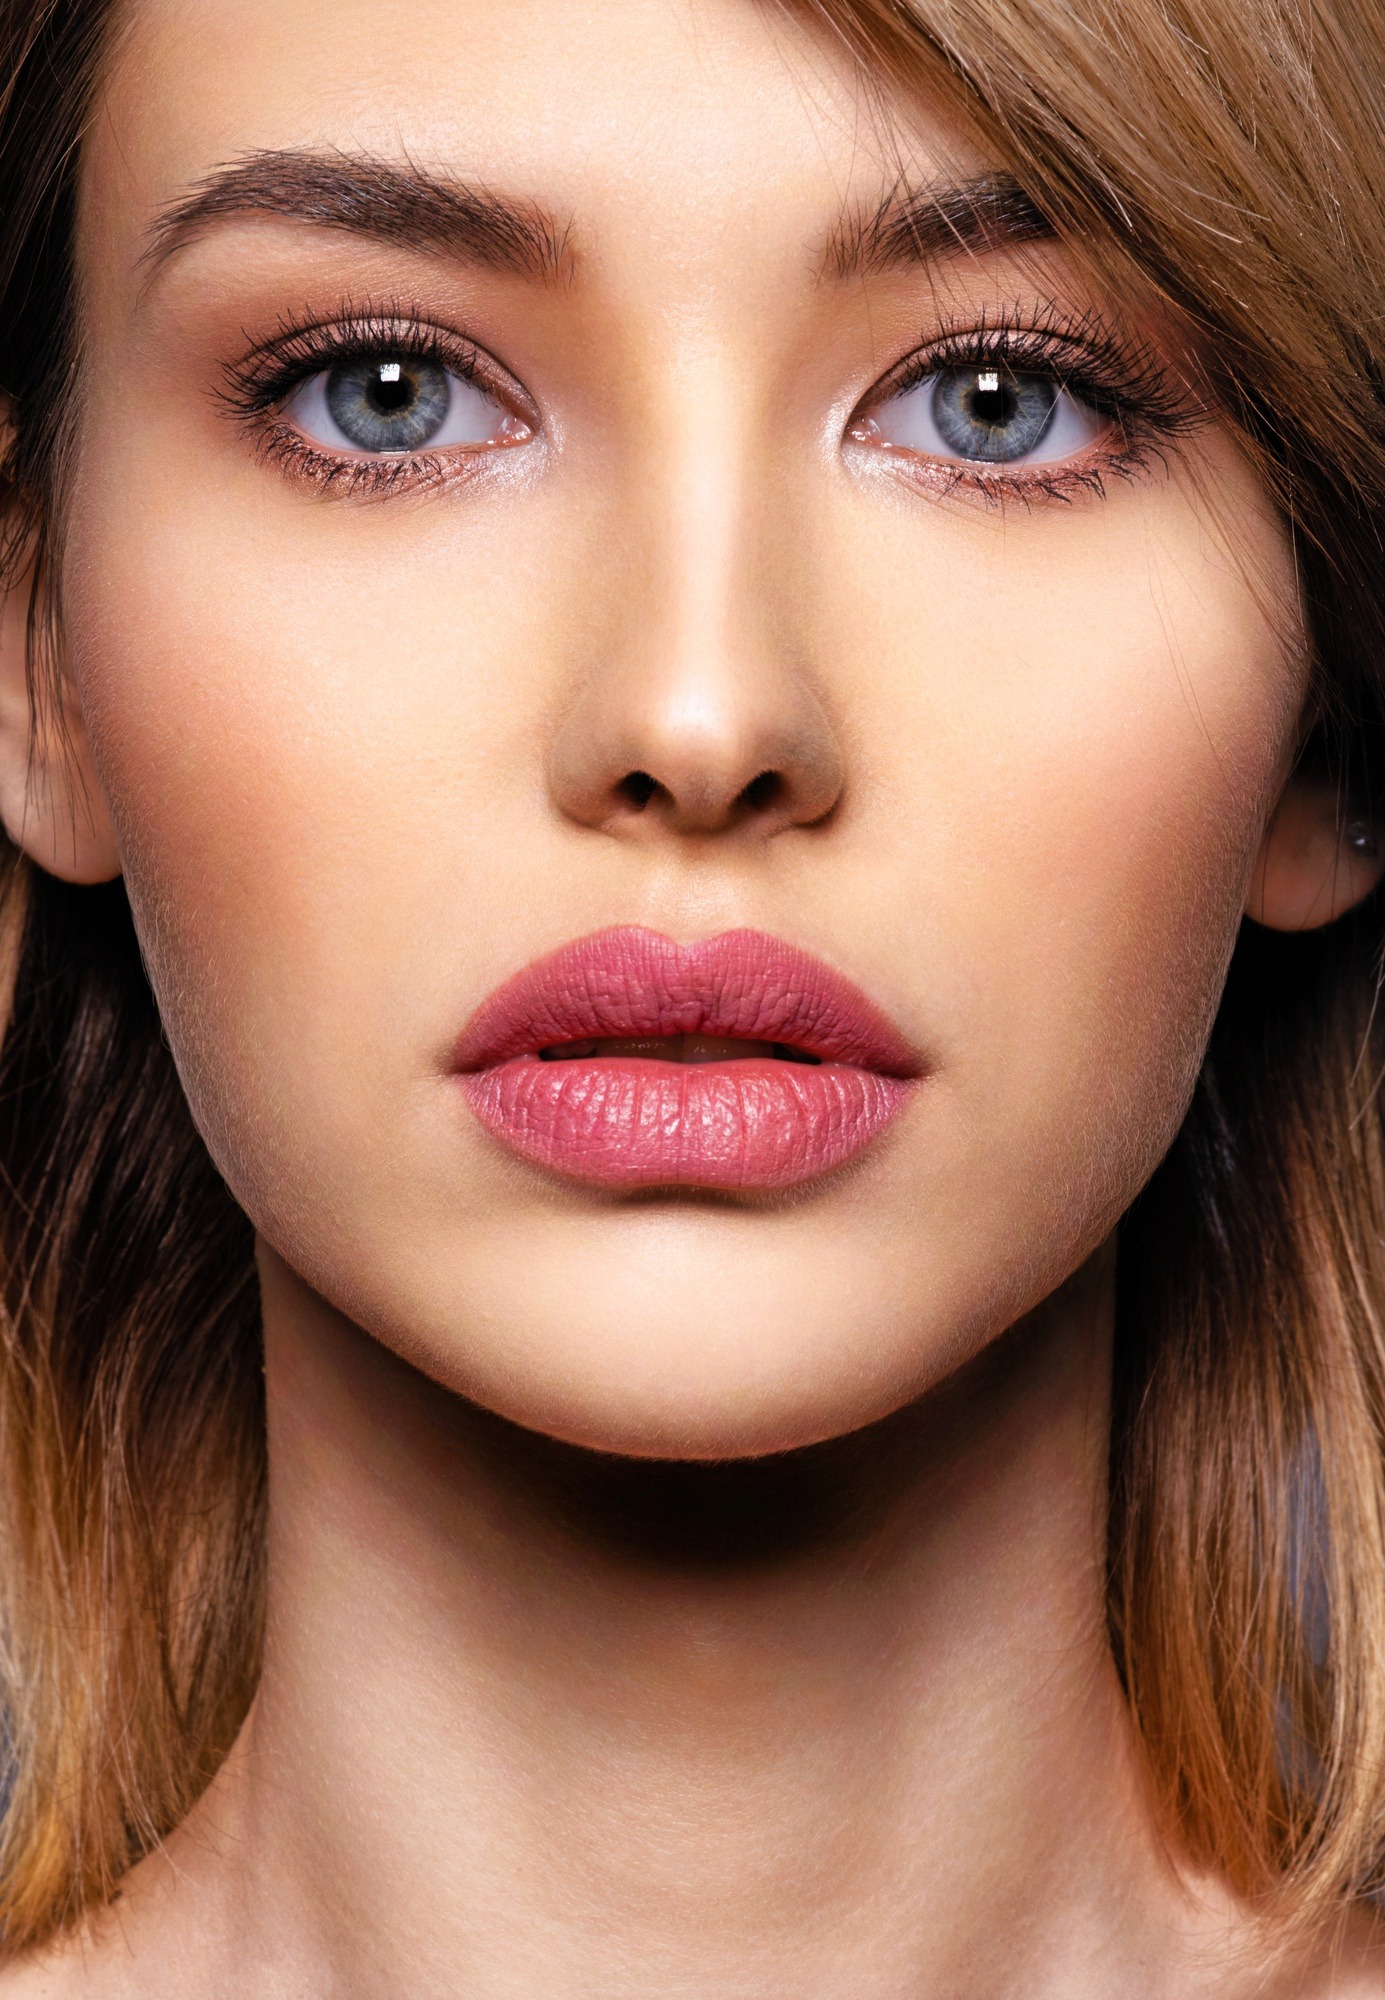 How to make Lips appear fuller and plump